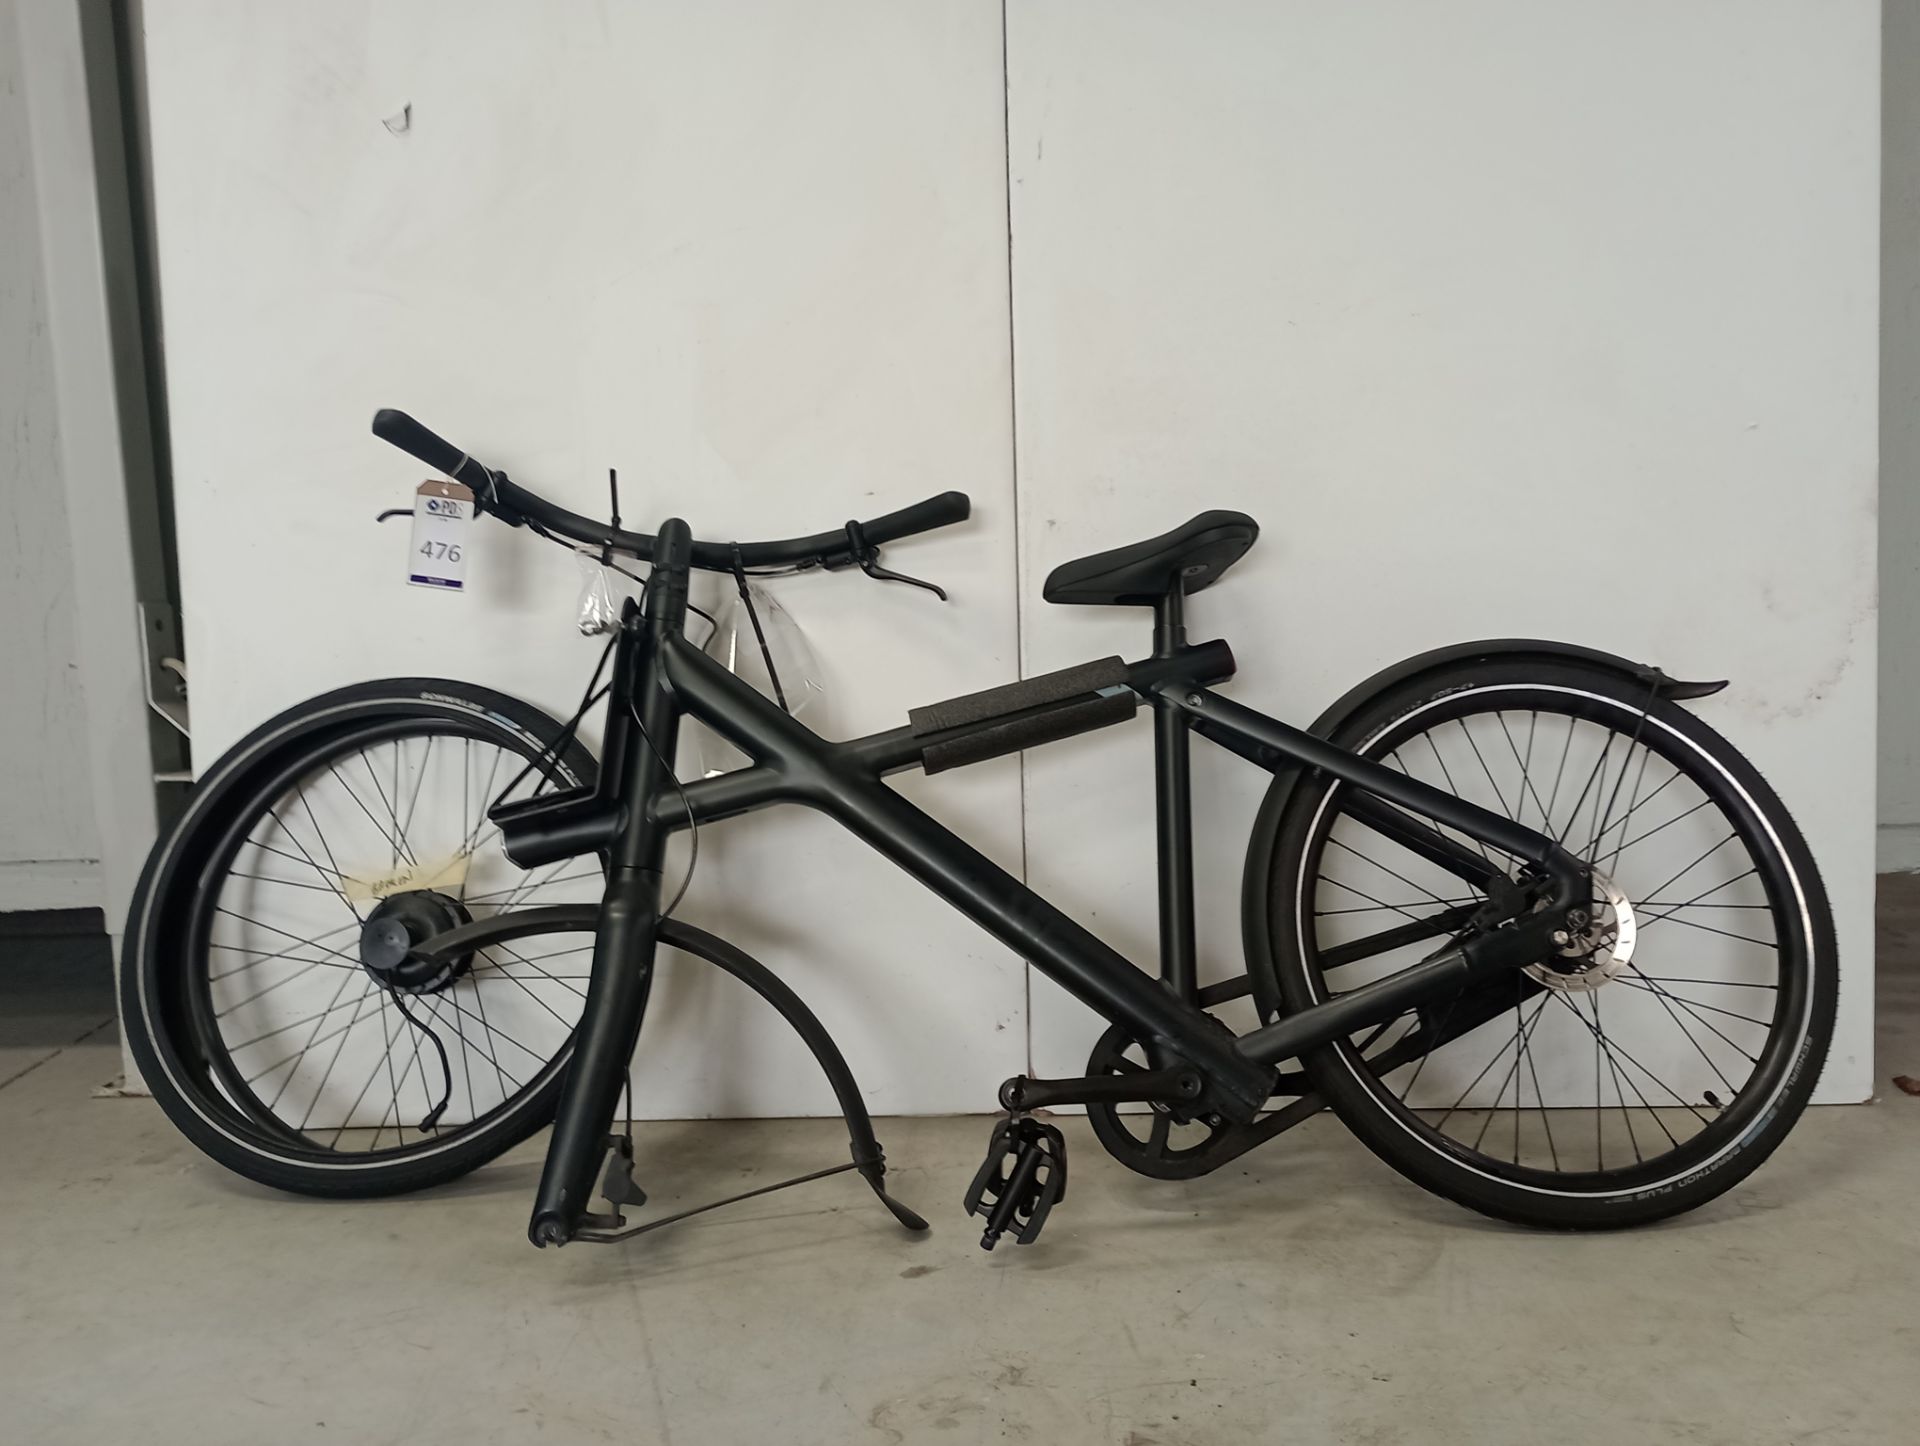 VanMoof X3 Electric Bike, Serial Number ASY4101879 (NOT ROADWORTHY - FOR SPARES ONLY) (No codes